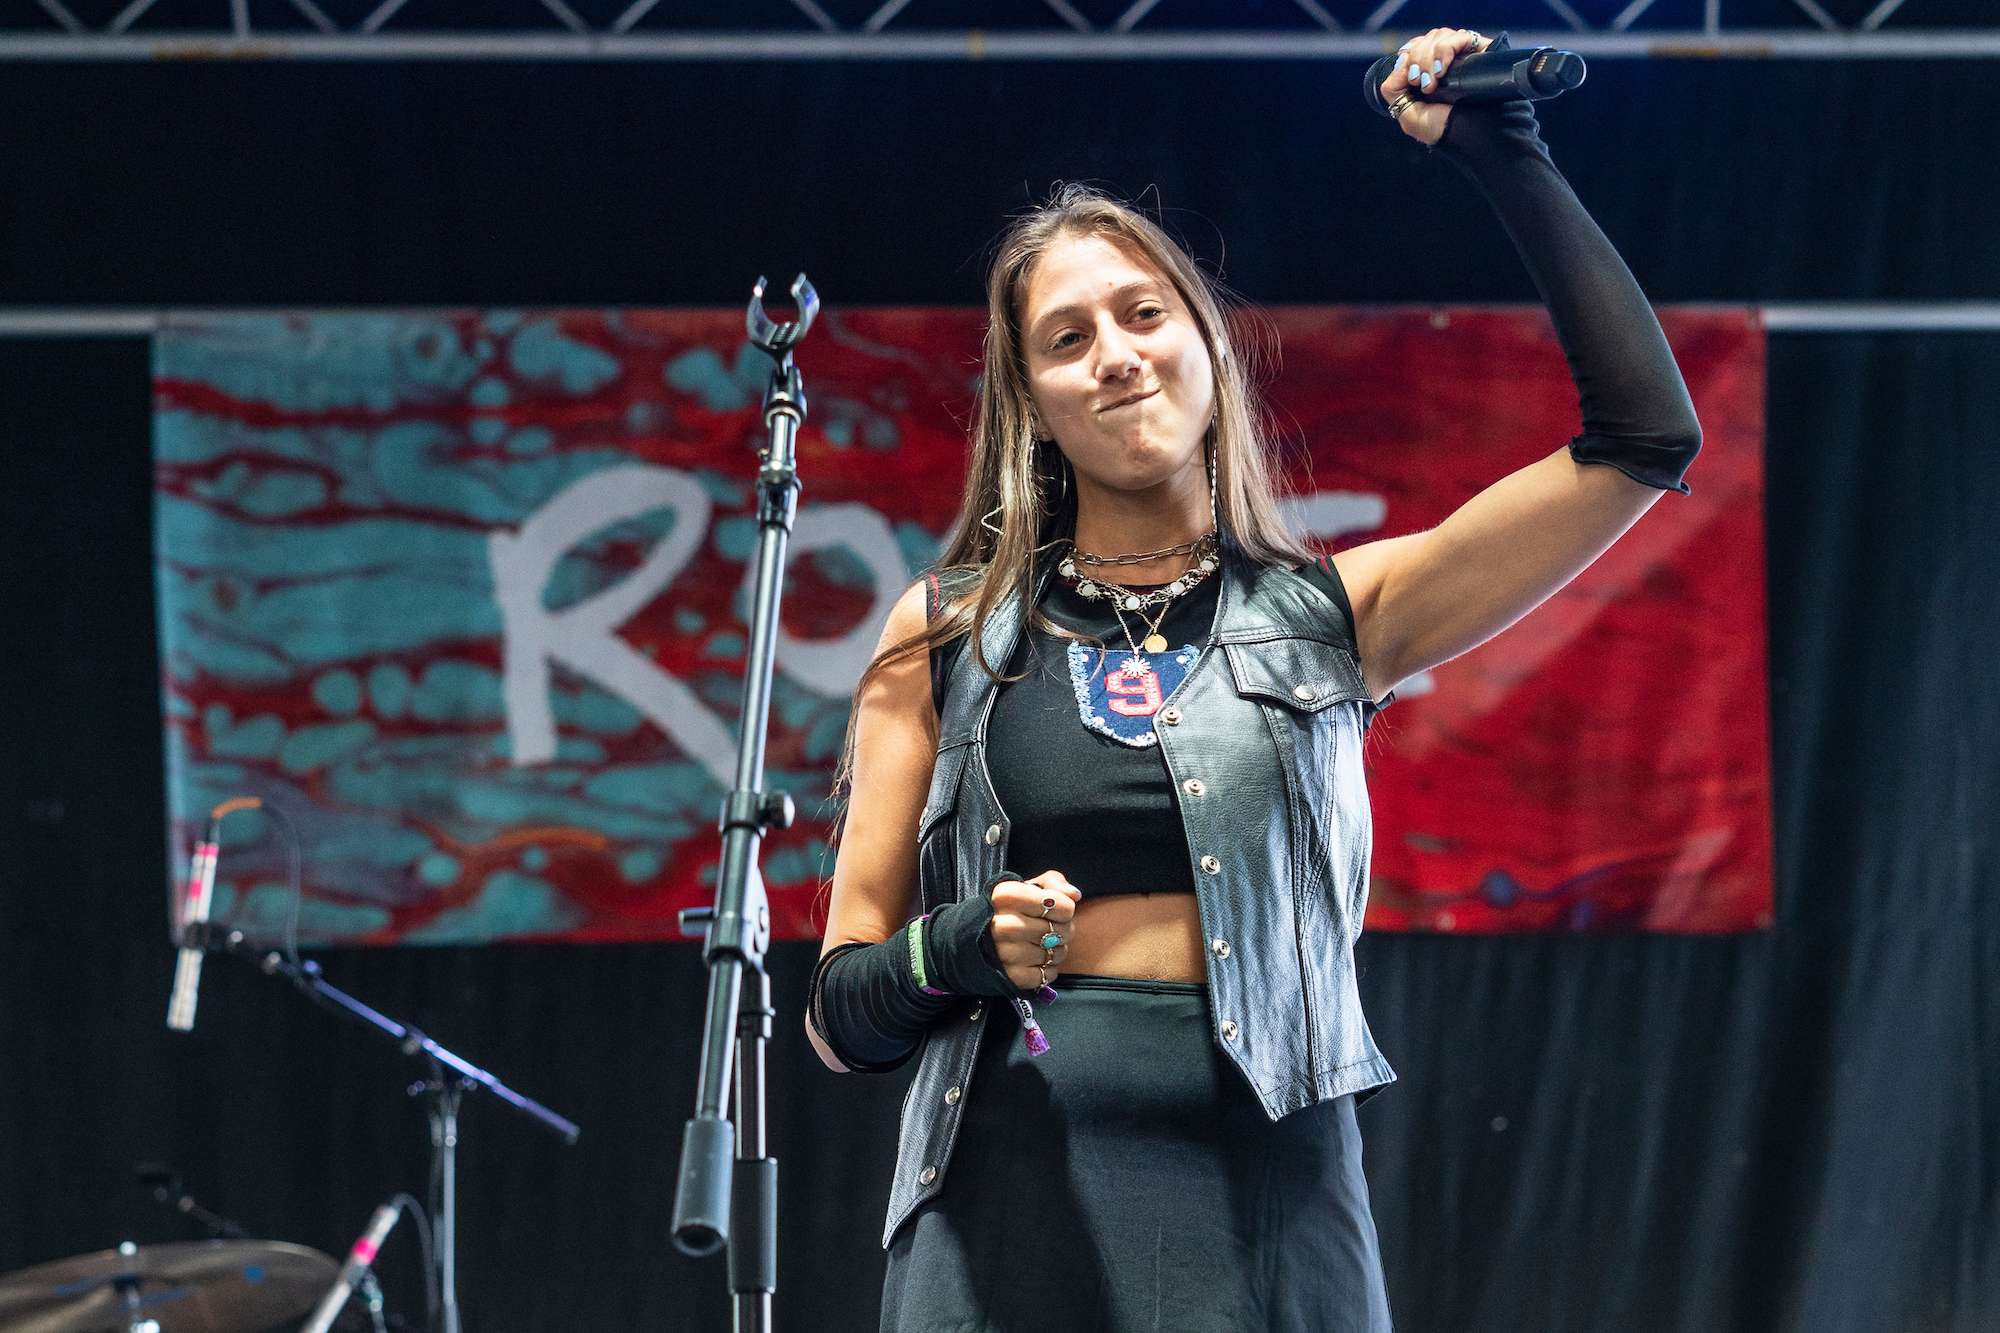 Rosie Live at Lollapalooza [GALLERY] 7